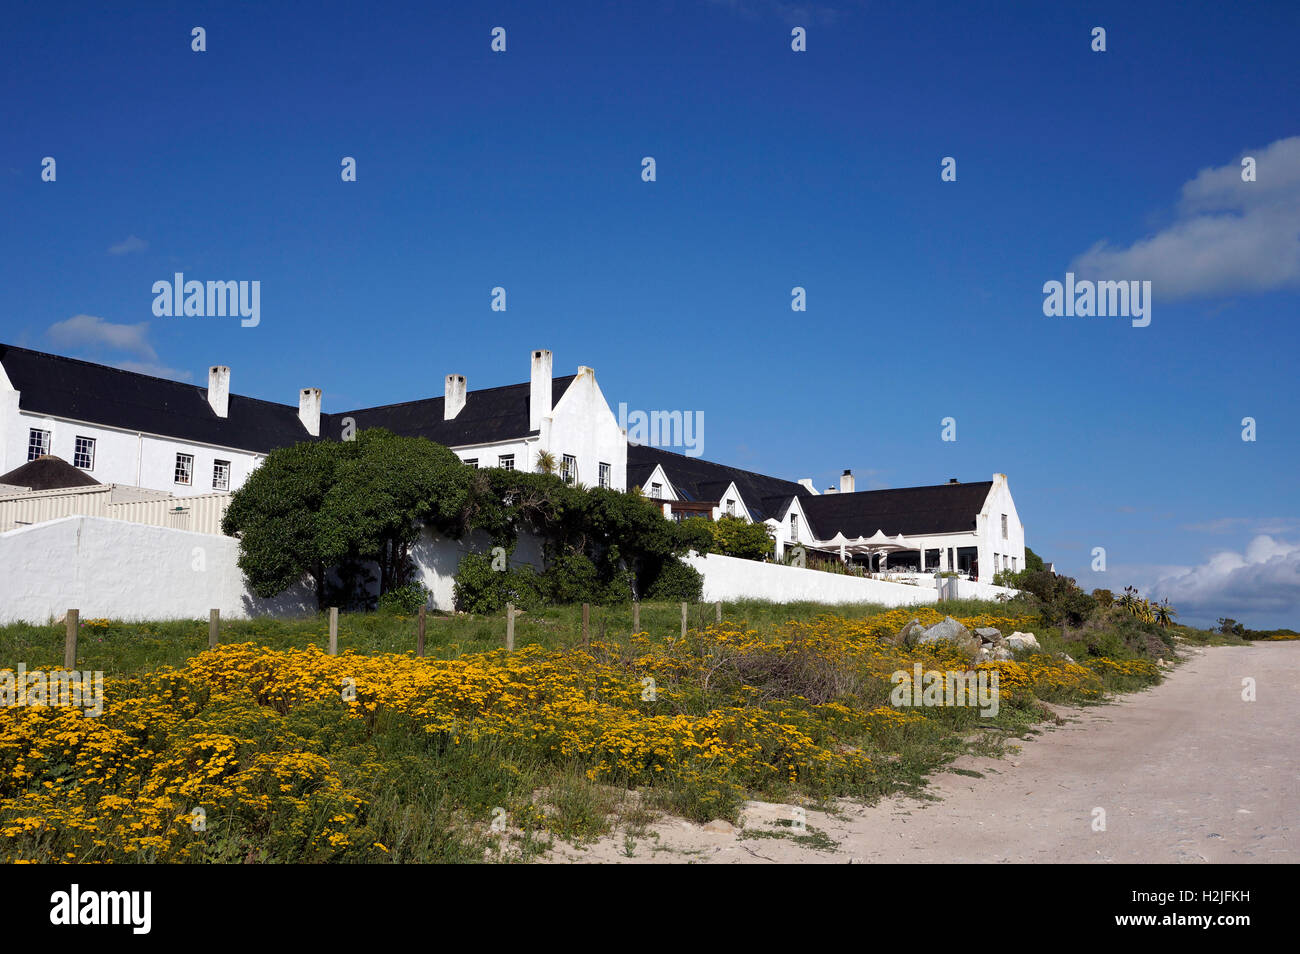 The Farmhouse Hotel in Langebaan, Western Cape Province, South Africa. Stock Photo